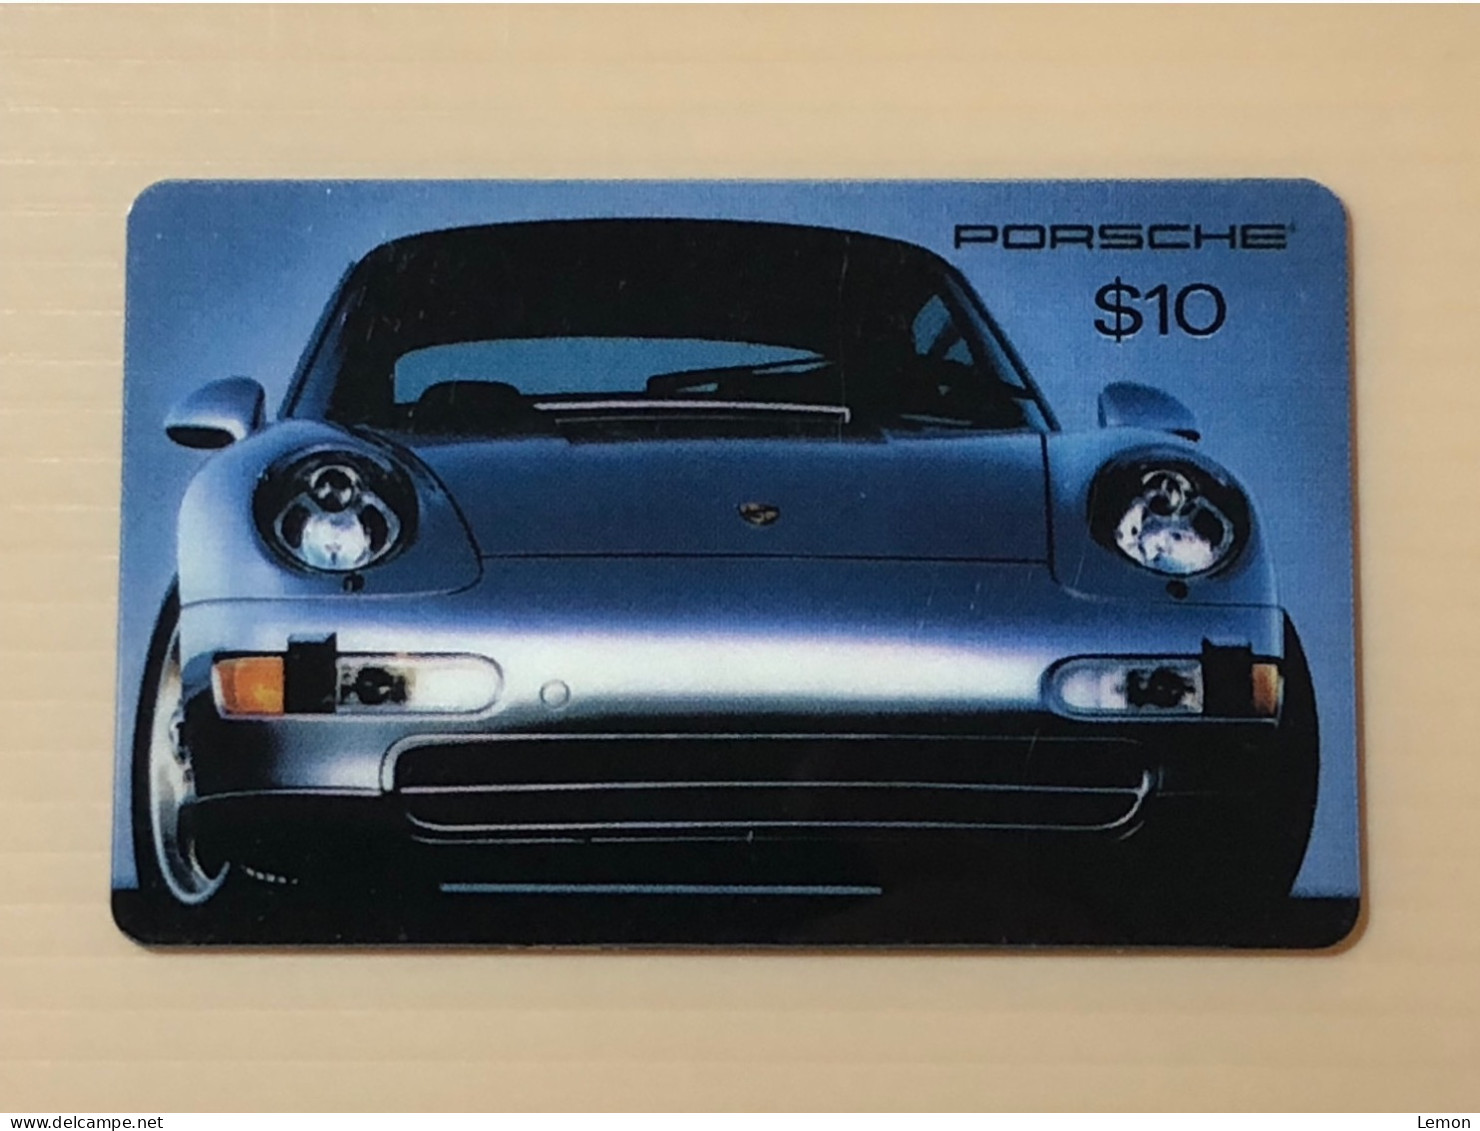 Mint USA UNITED STATES America Prepaid Telecard Phonecard, PORSCHE  CAR (500EX), Set Of 1 Mint Card - Collections